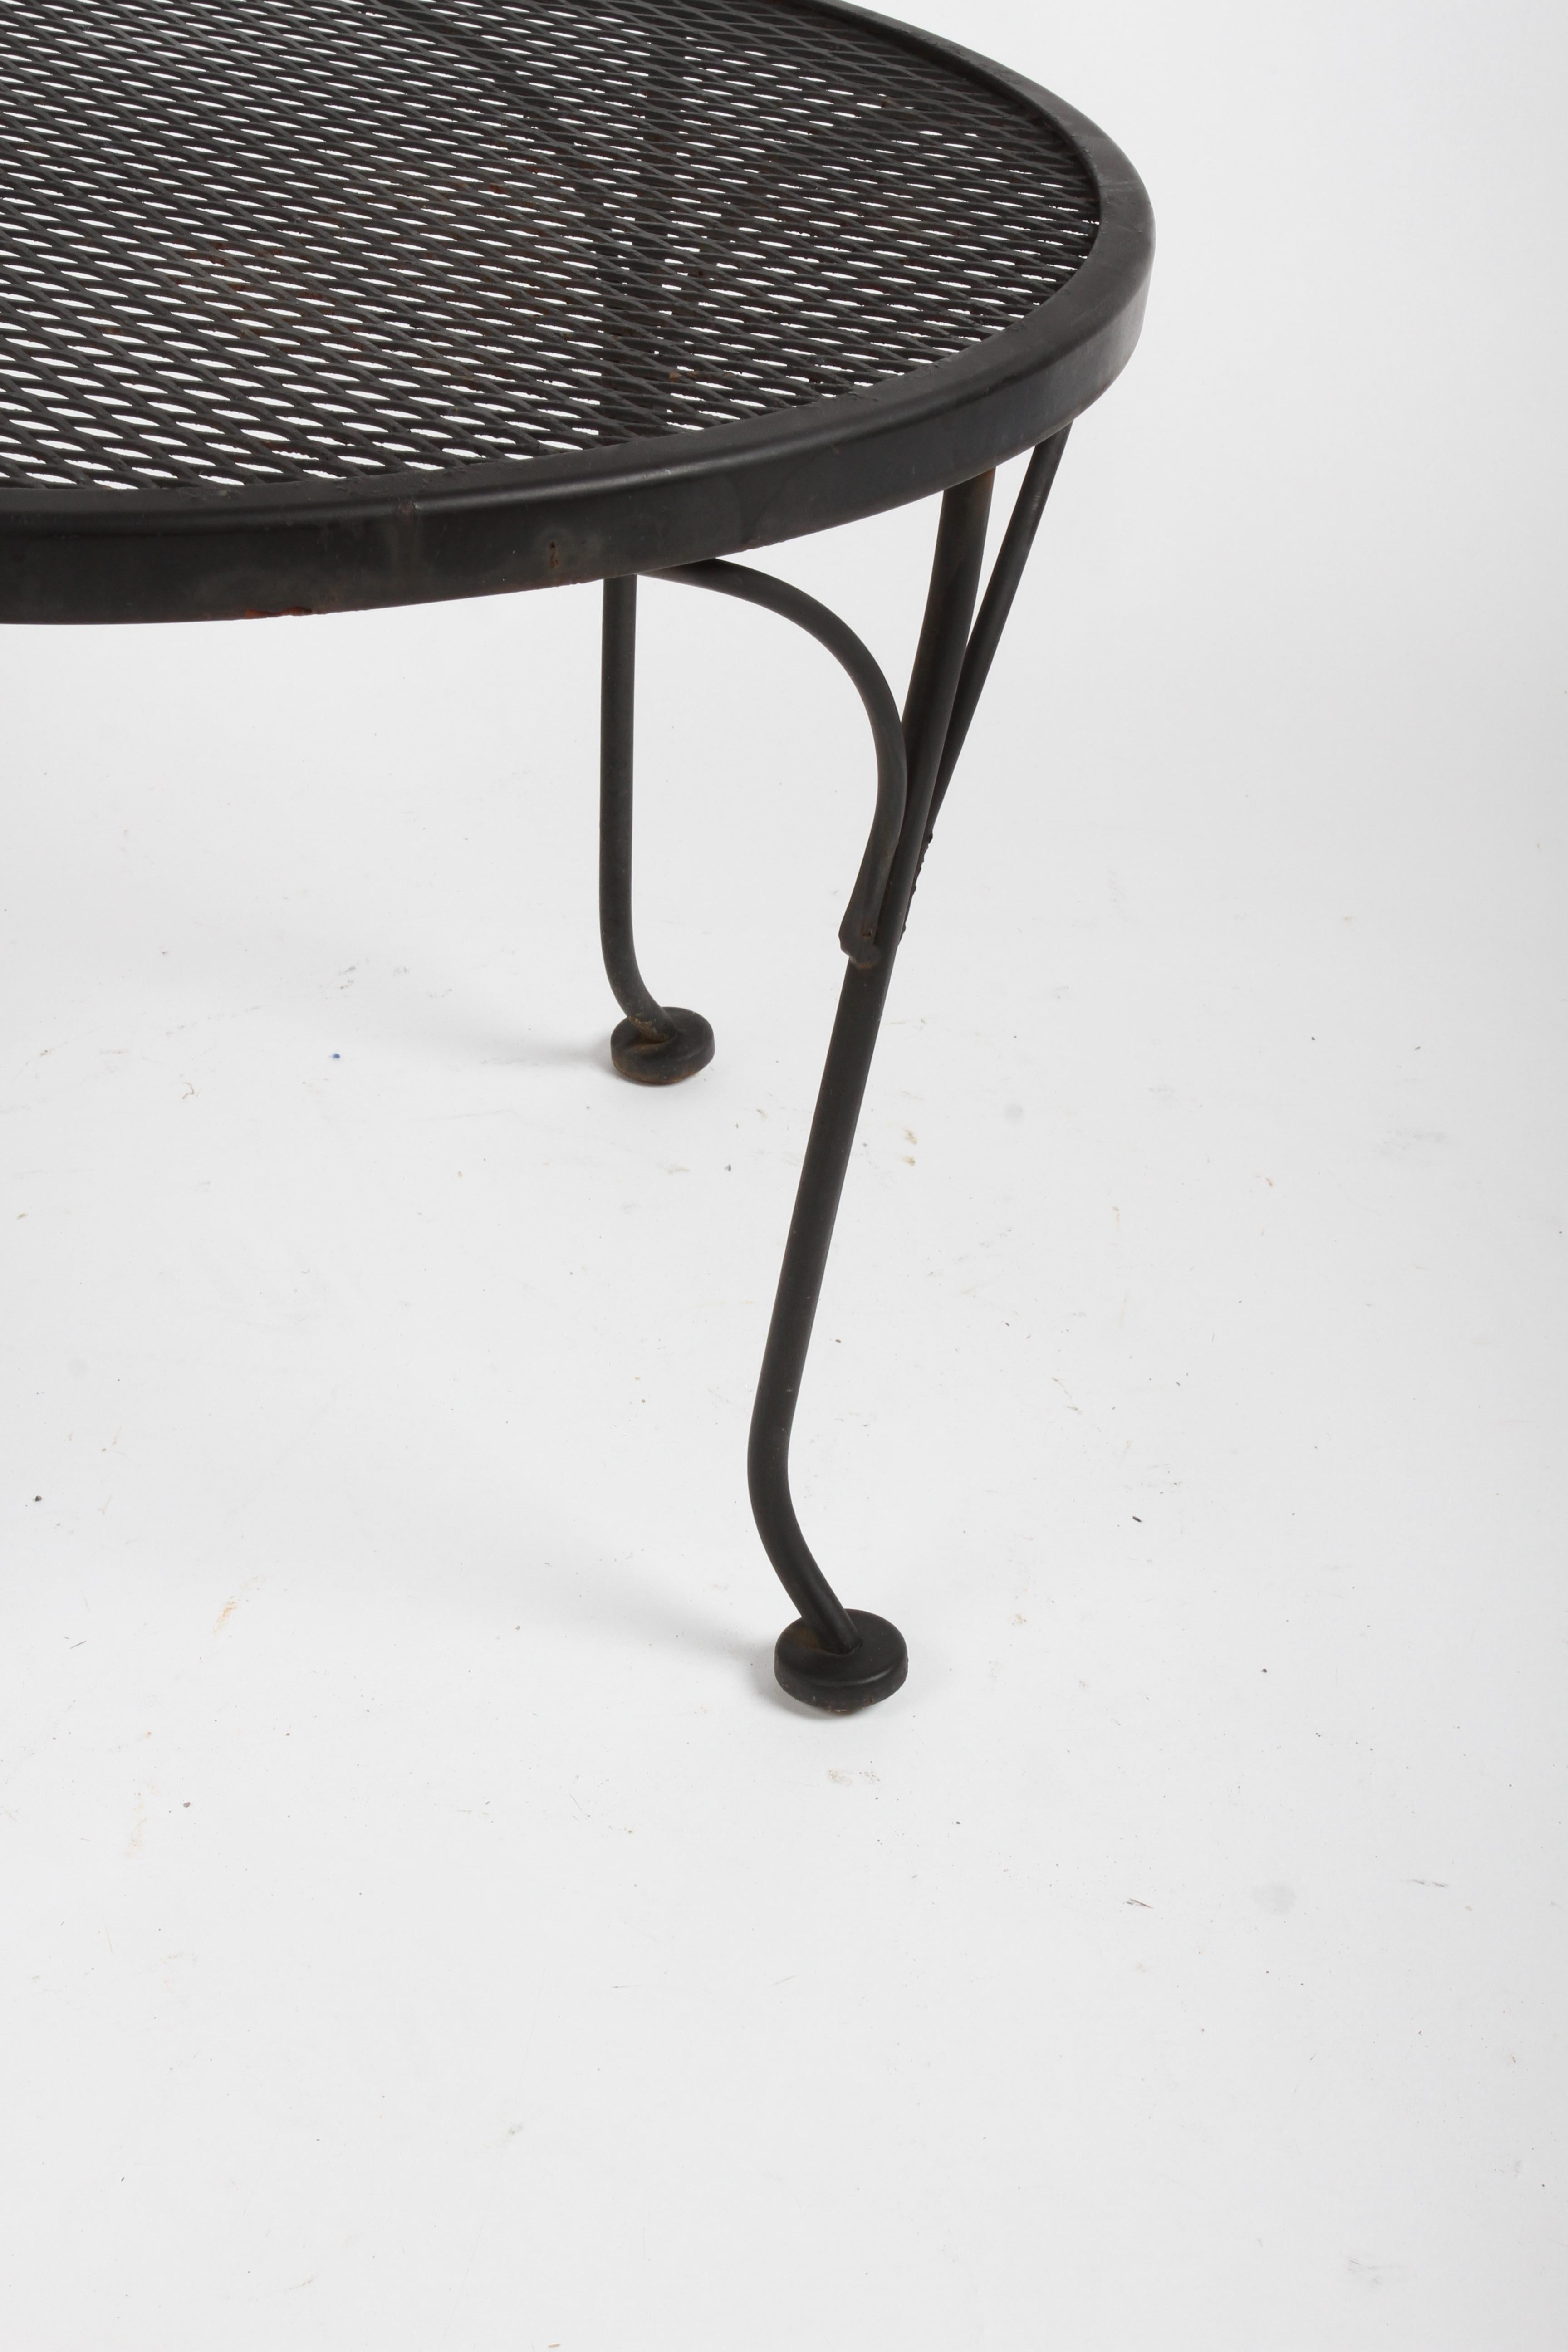 Mid-20th Century Russell Woodard Round Black Wrought Iron & Mesh Patio Coffee of Side Table